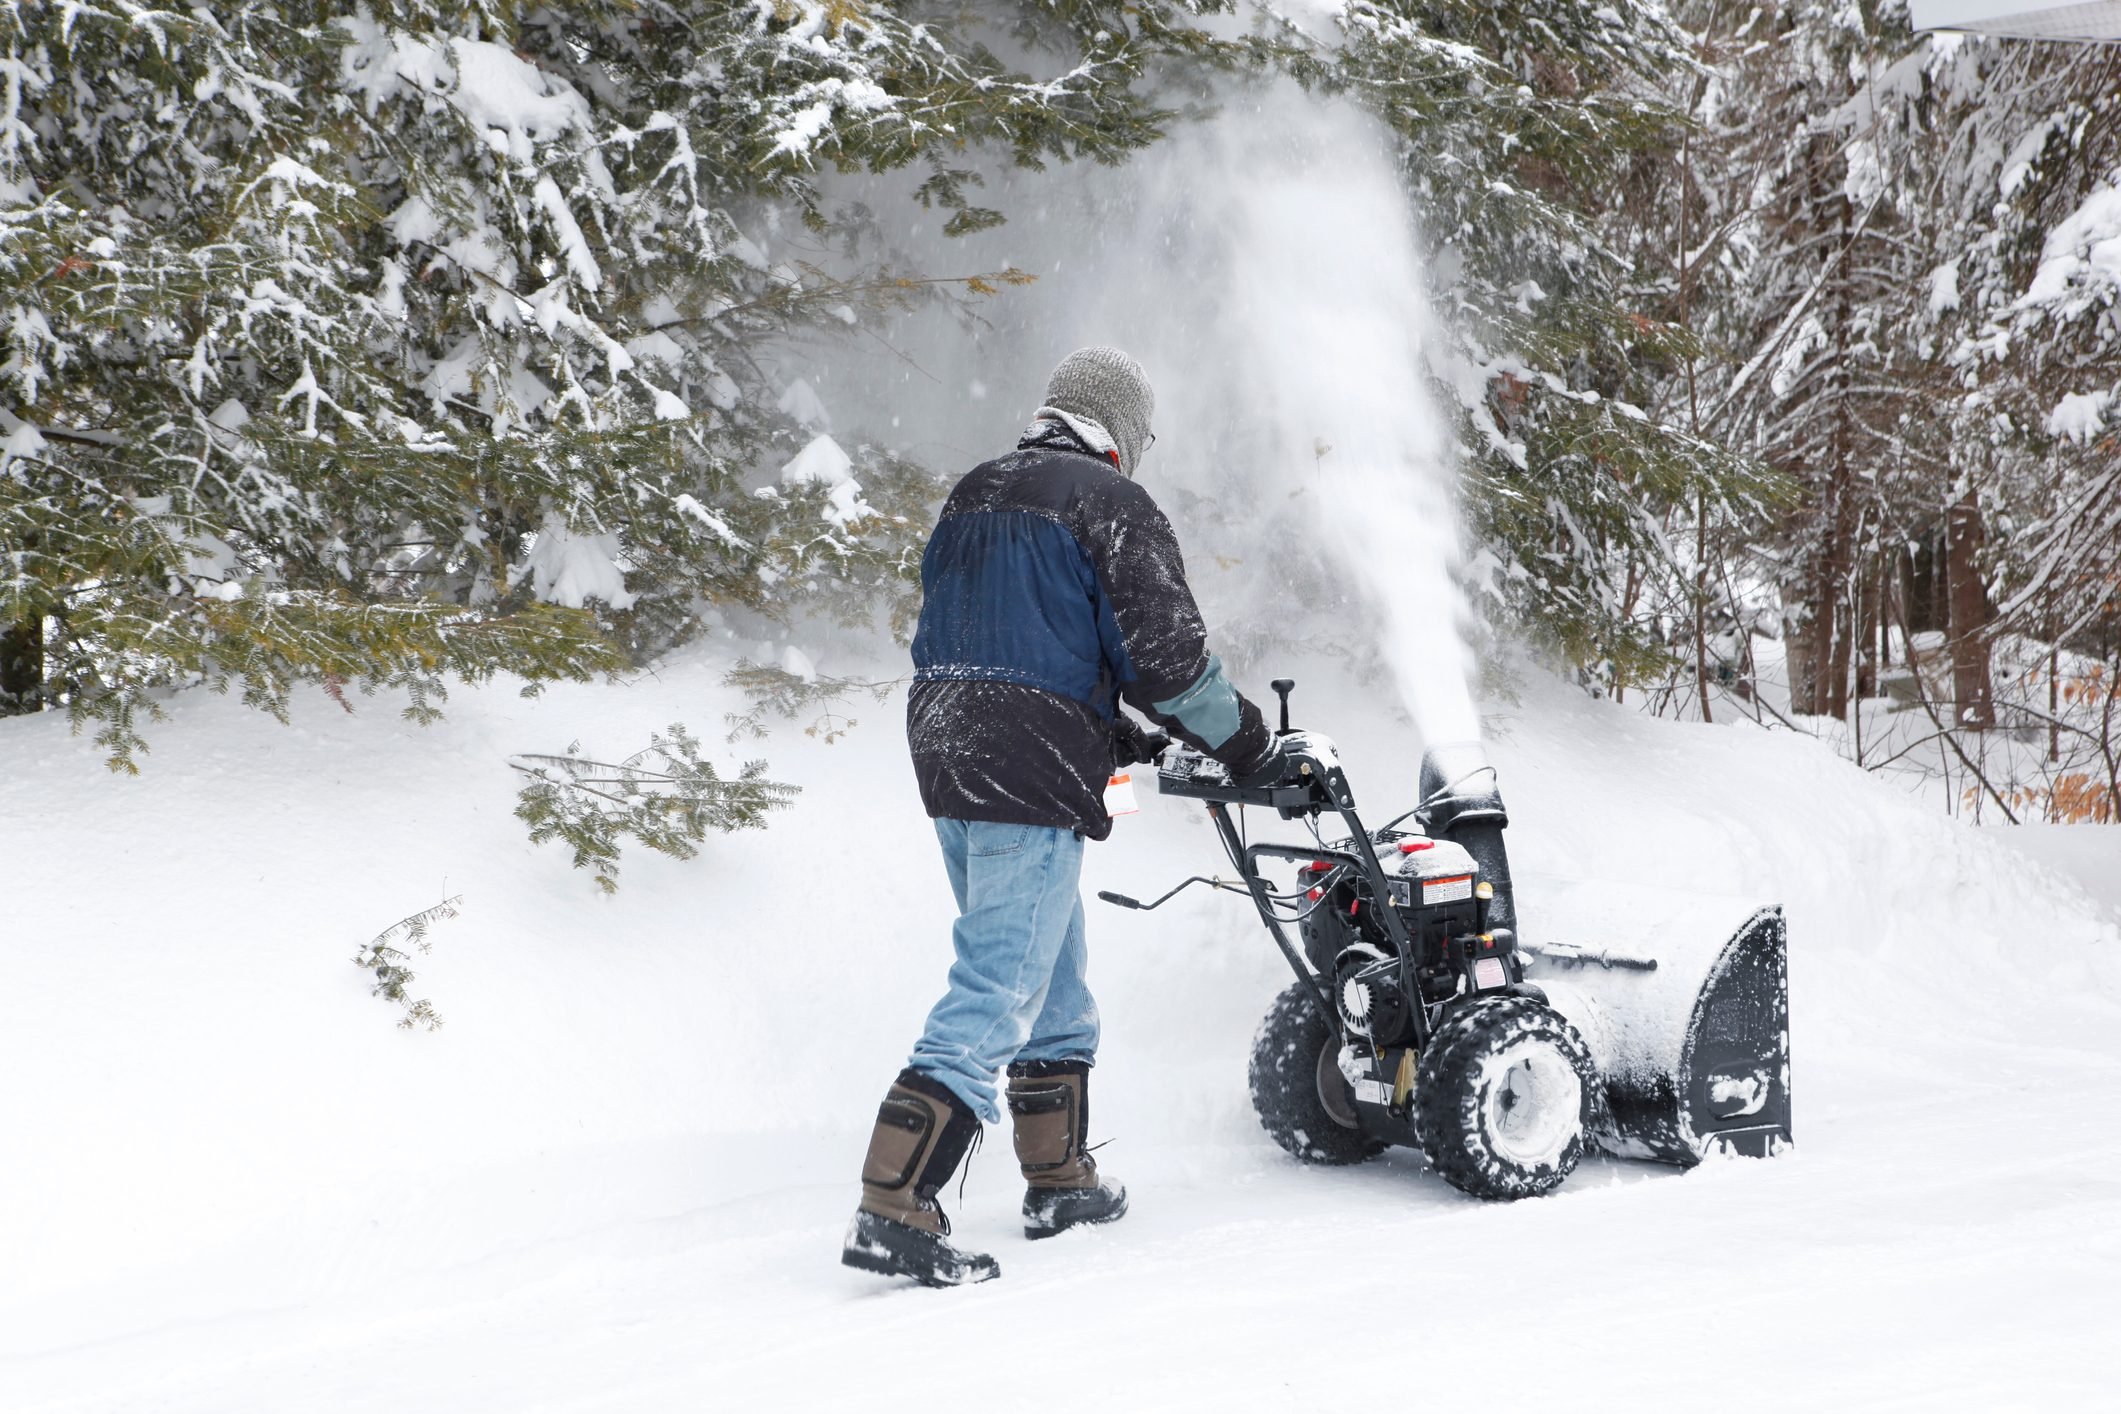 7 Troubleshooting Tips to Try If Your Snow Blower Won't Start Up